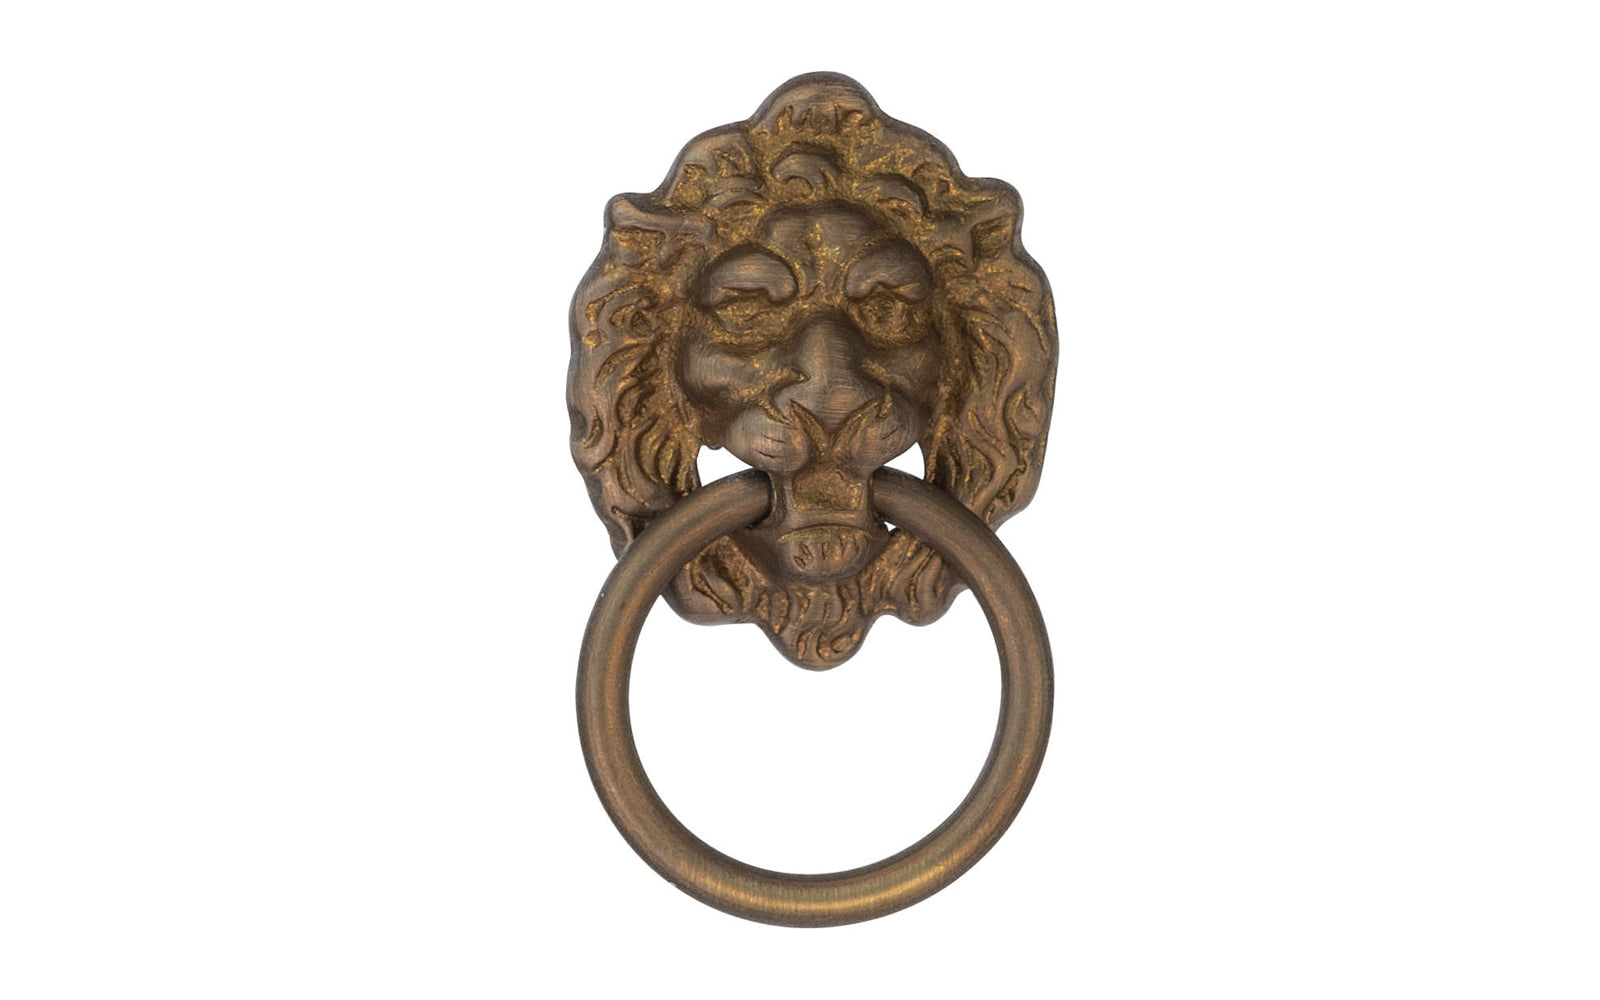 Classic & traditional lion-head ring pull. Great for embellishment of cabinets, drawers, & furniture. Made of quality solid brass material, this ring pull is thick & stout for durable use. Designed in the 19th century style, Victorian style, Duncan Phyfe style of hardware. Antique Brass Finish.